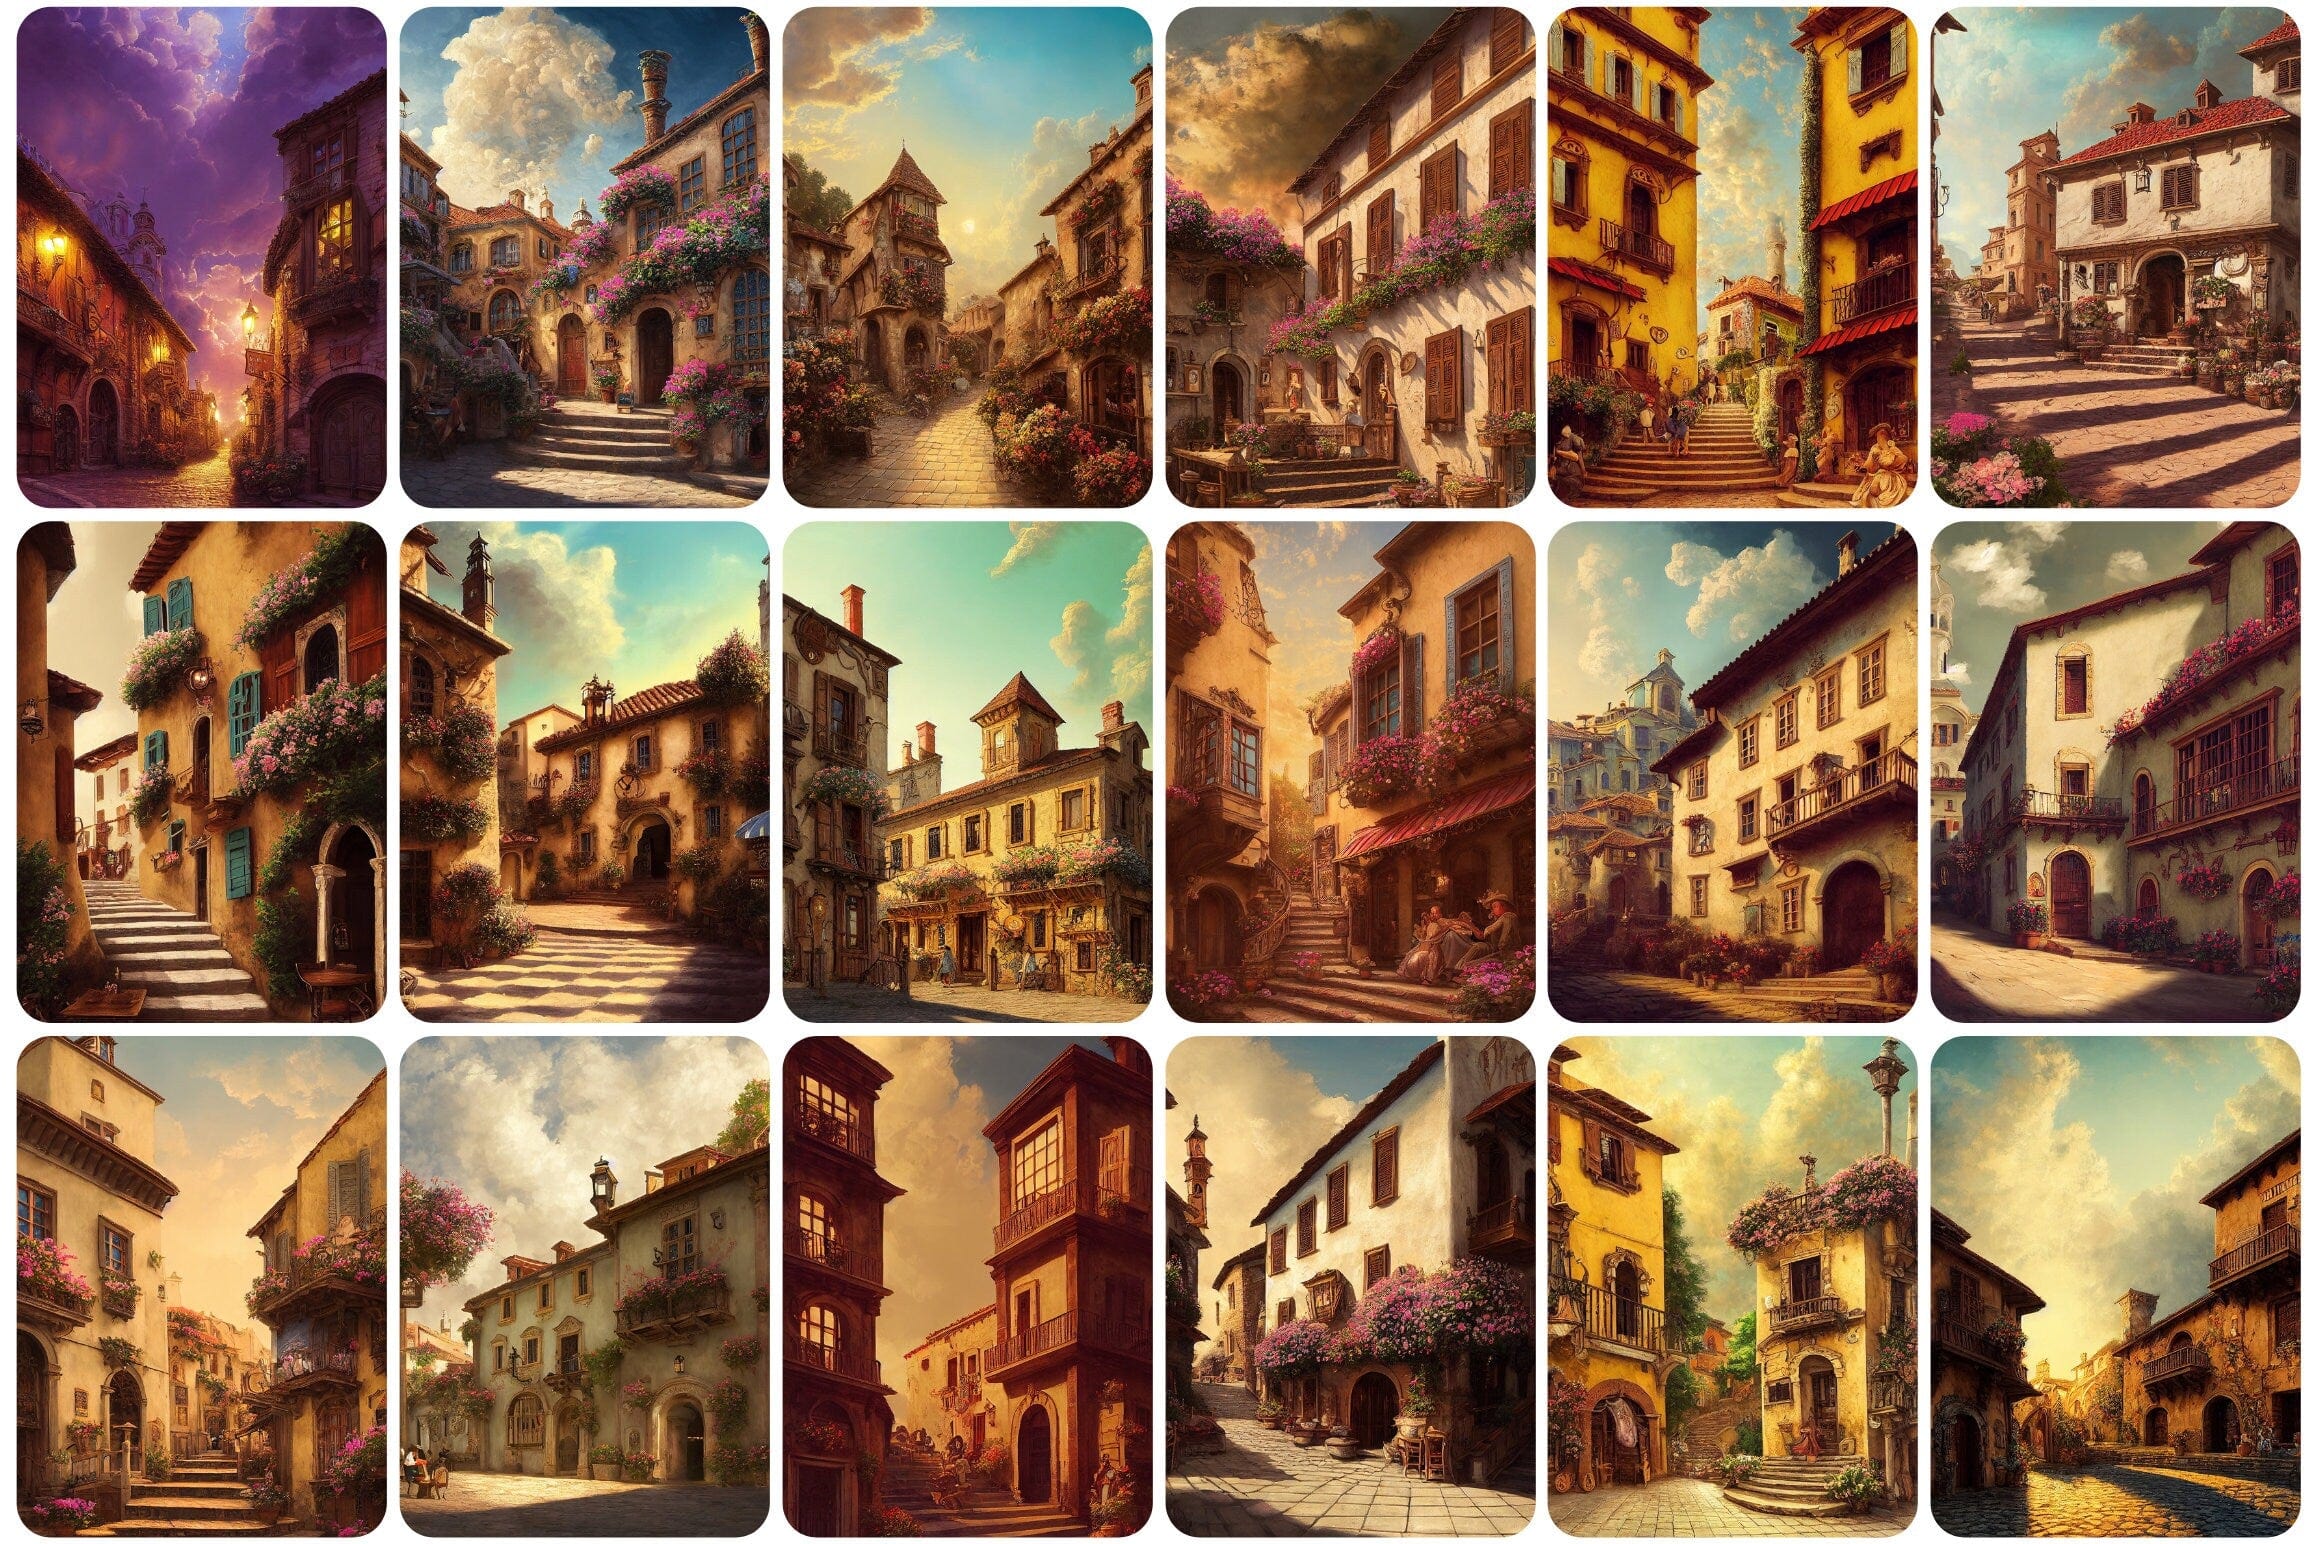 110+ High-Resolution Paintings of Renaissance-Inspired Taverns and Villas - Good for Home Decor, Art History Study - Historical Architecture Digital Download Sumobundle